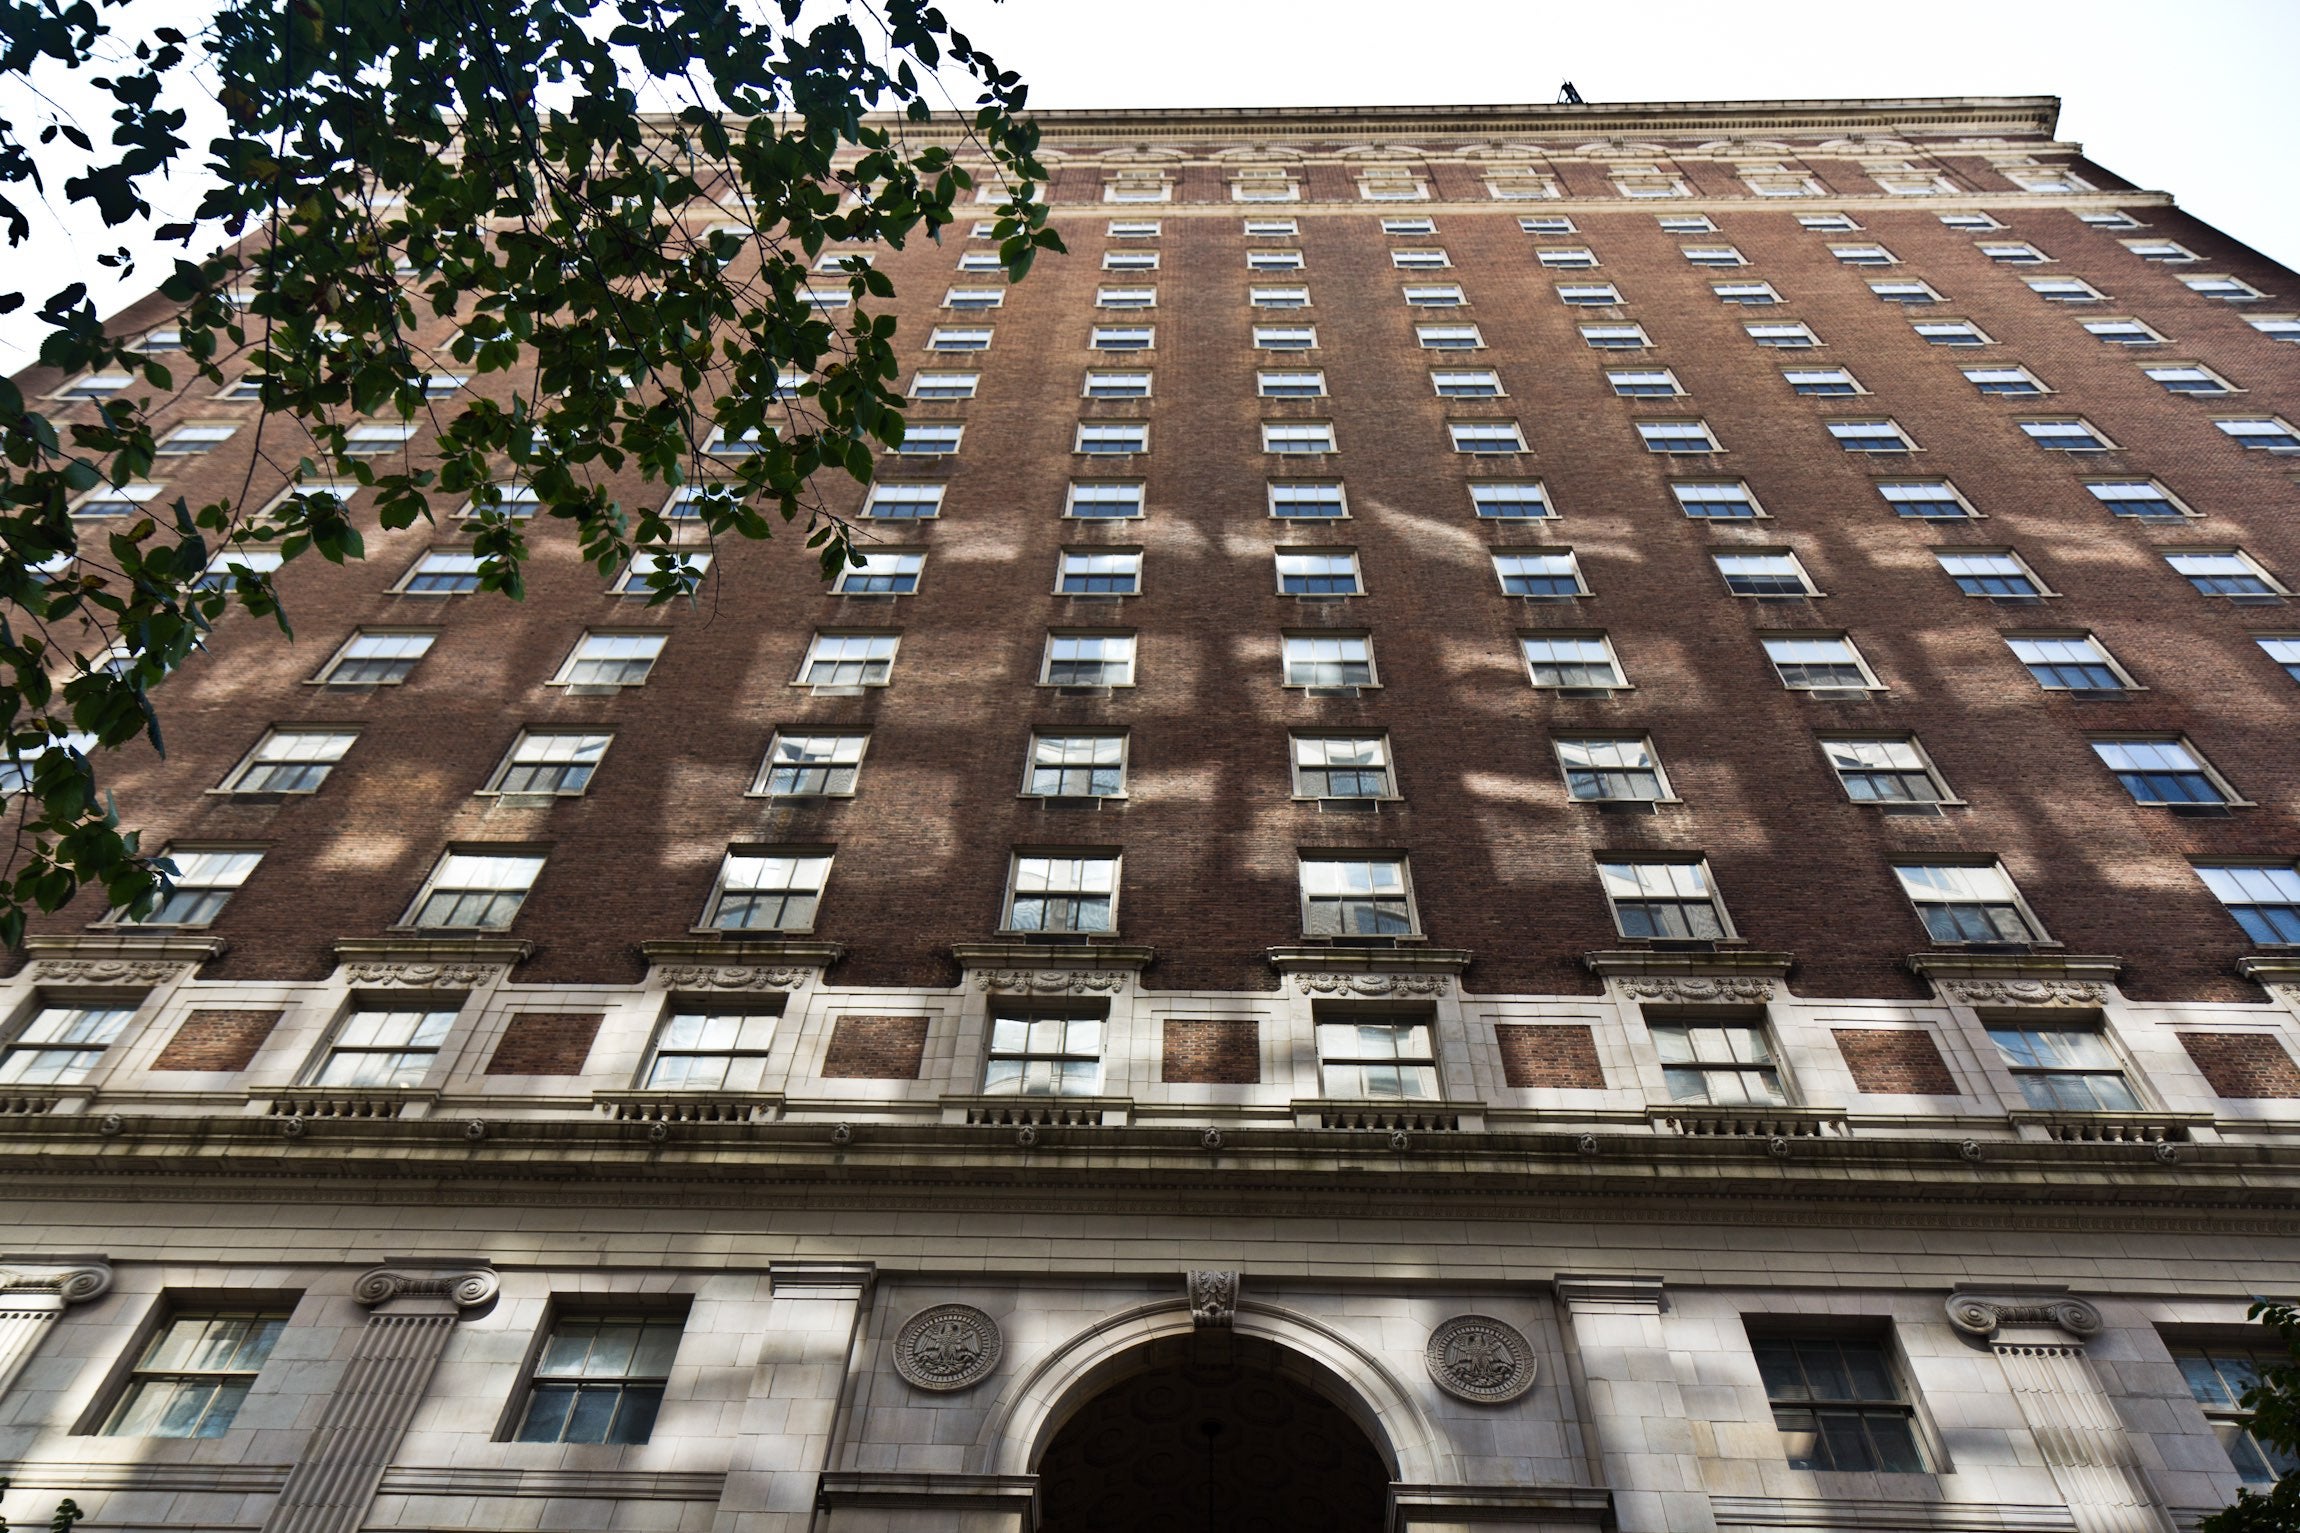 The Benjamin Franklin Hotel, located at 834 Chestnut St, opened in 1925. (Kimberly Paynter/WHYY)